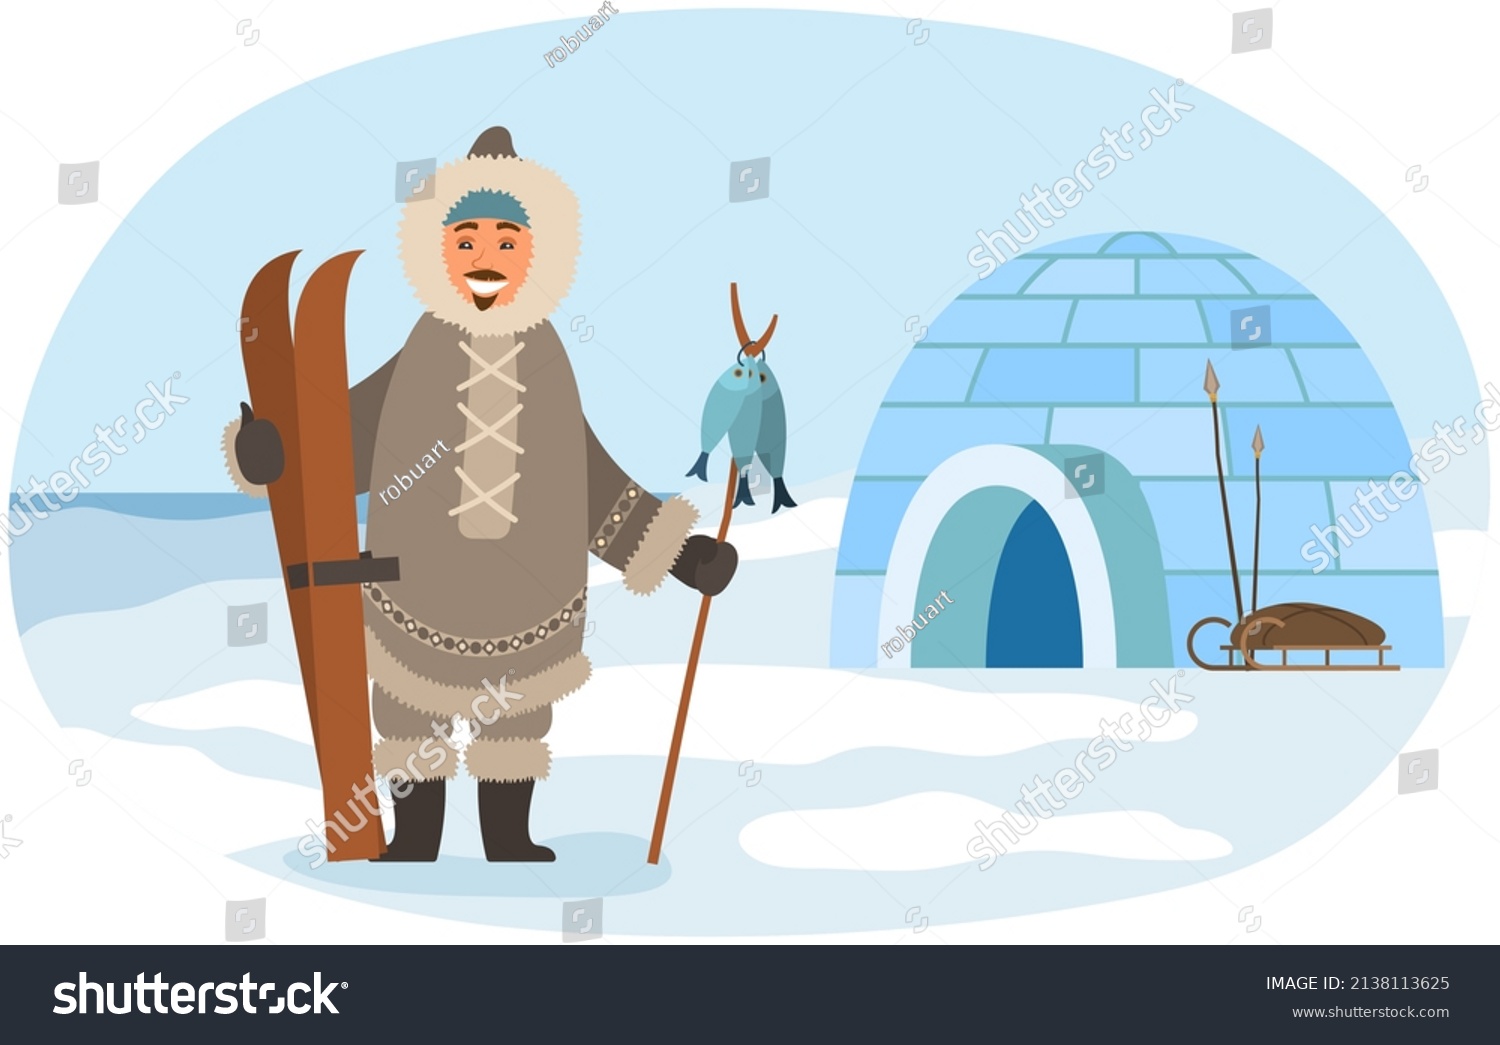 Man in warm clothes living in Arctic vector illustration. Landscape with mountains, beautiful view of pole. Polar region nature, winter scenery. Eskimo with fish after fishing stands near igloo #2138113625